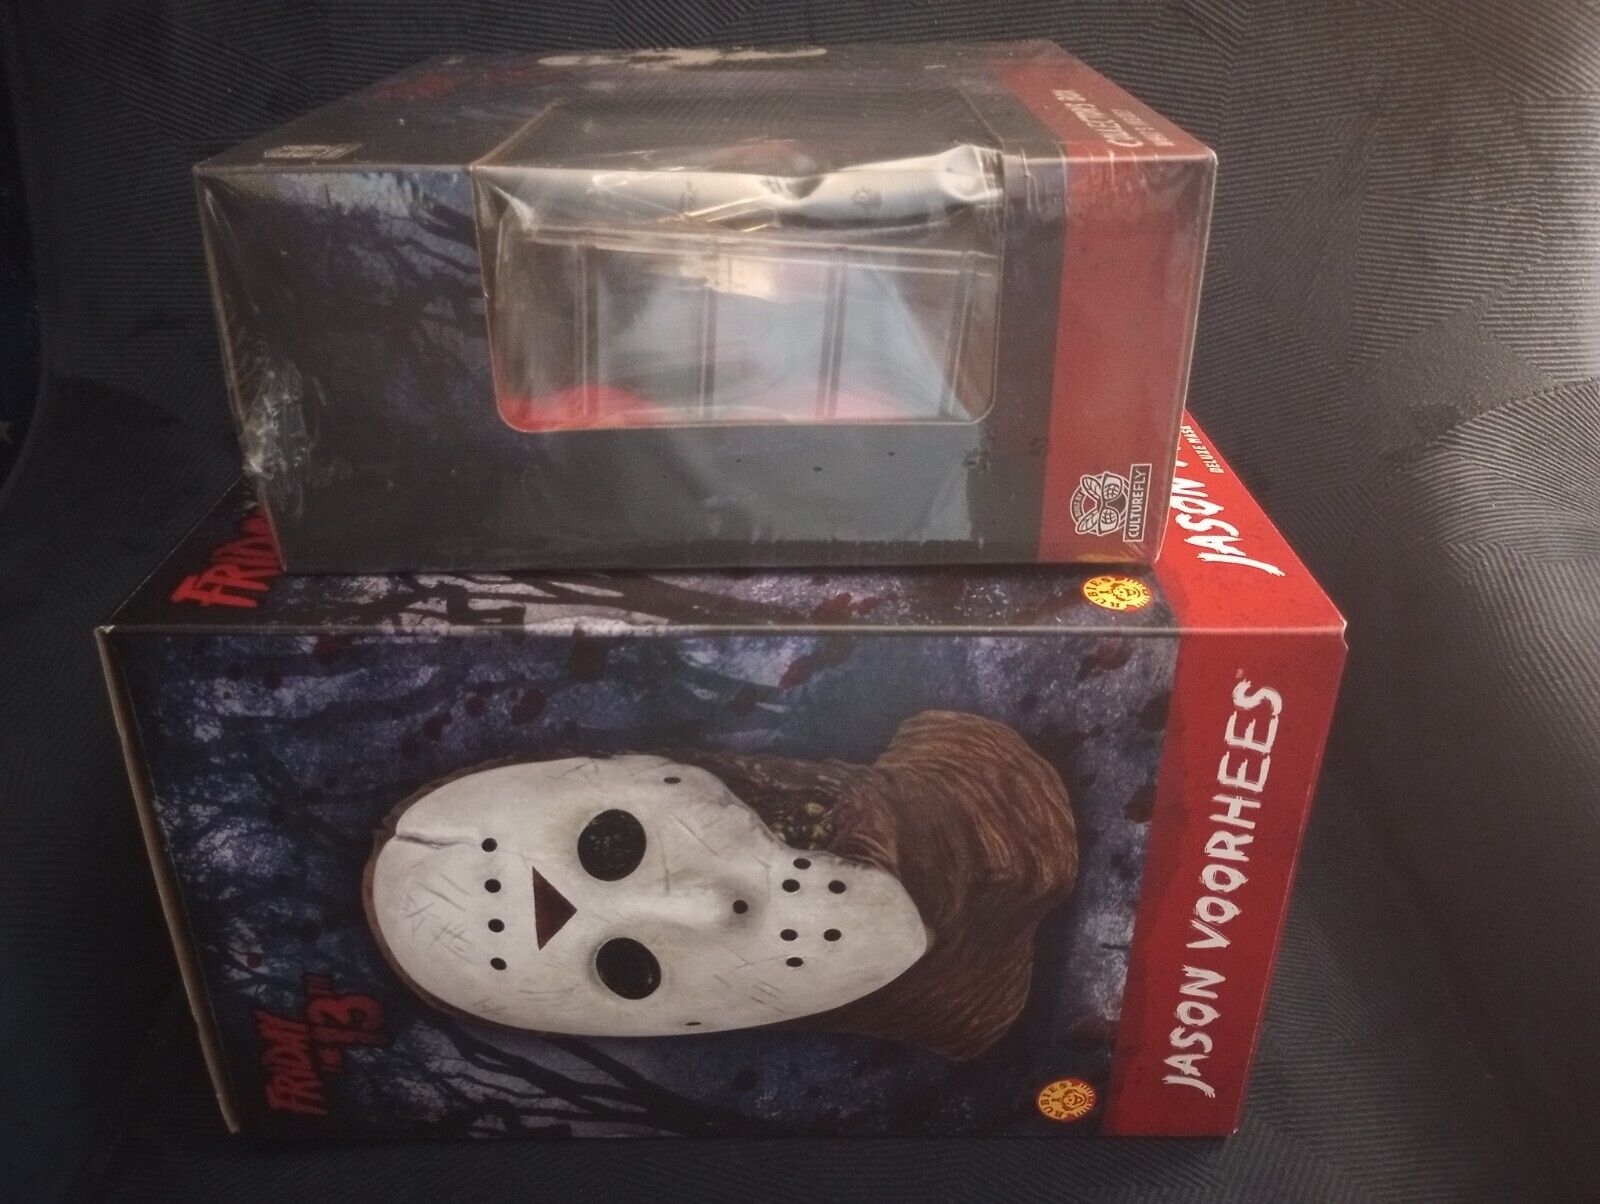 FRIDAY THE 13TH JASON VOORHEES Deluxe Mask + Collector's Box Rubie's 4181 - фотография #6